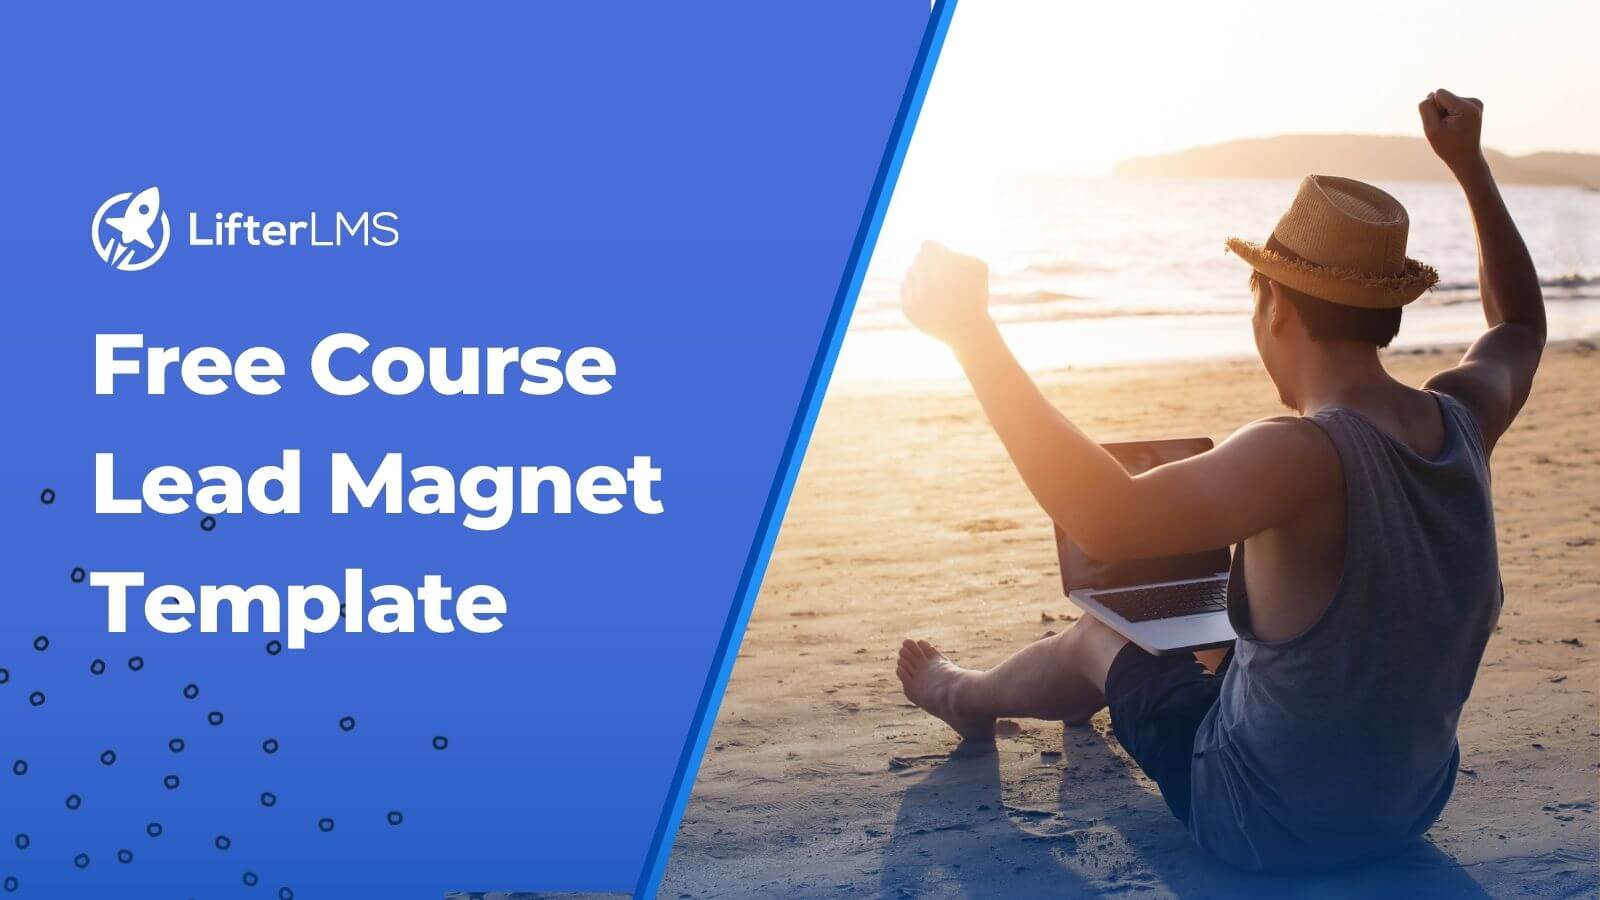 Free Course Lead Magnet Template